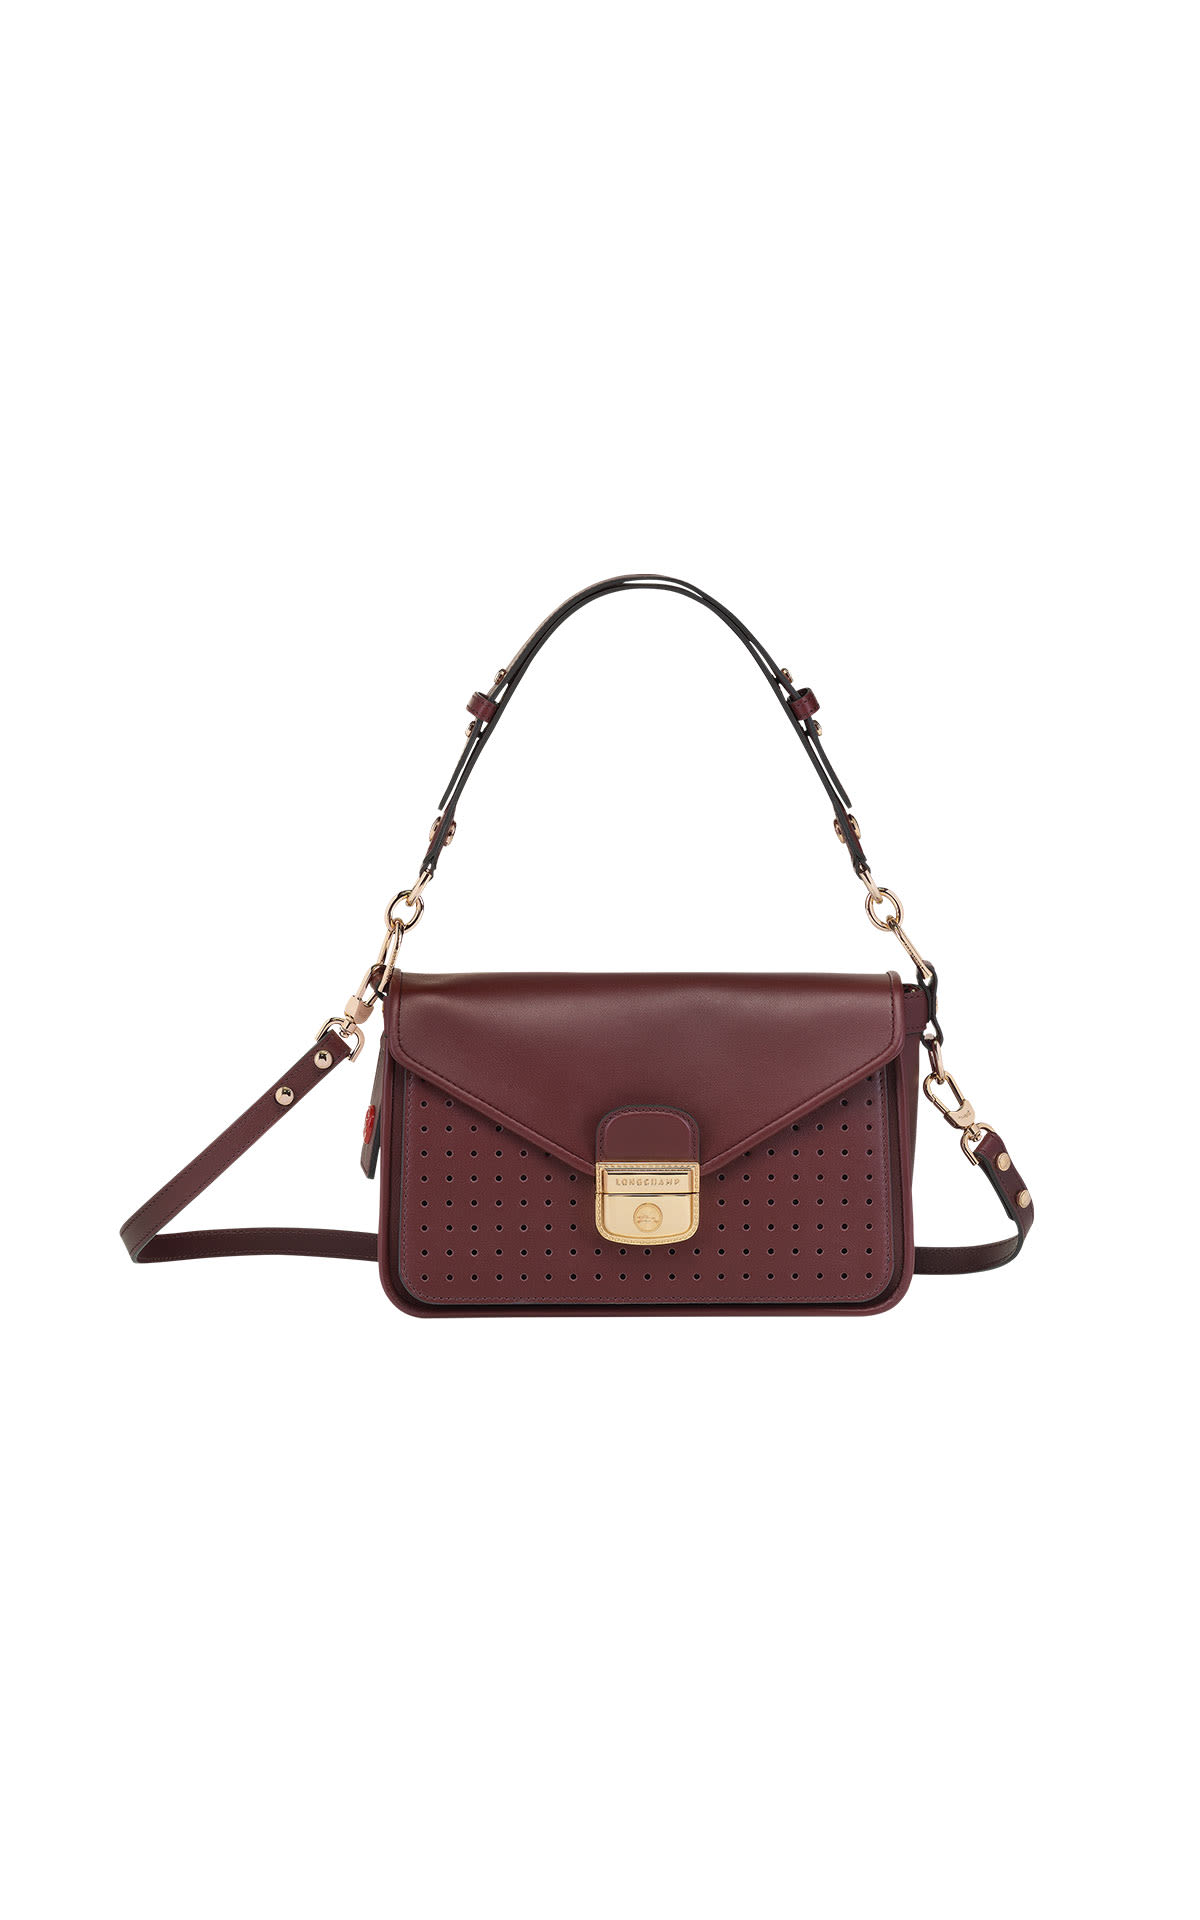 Longchamp Mademoiselle Longchamp small crossbody bag with detachable strap from Bicester Village